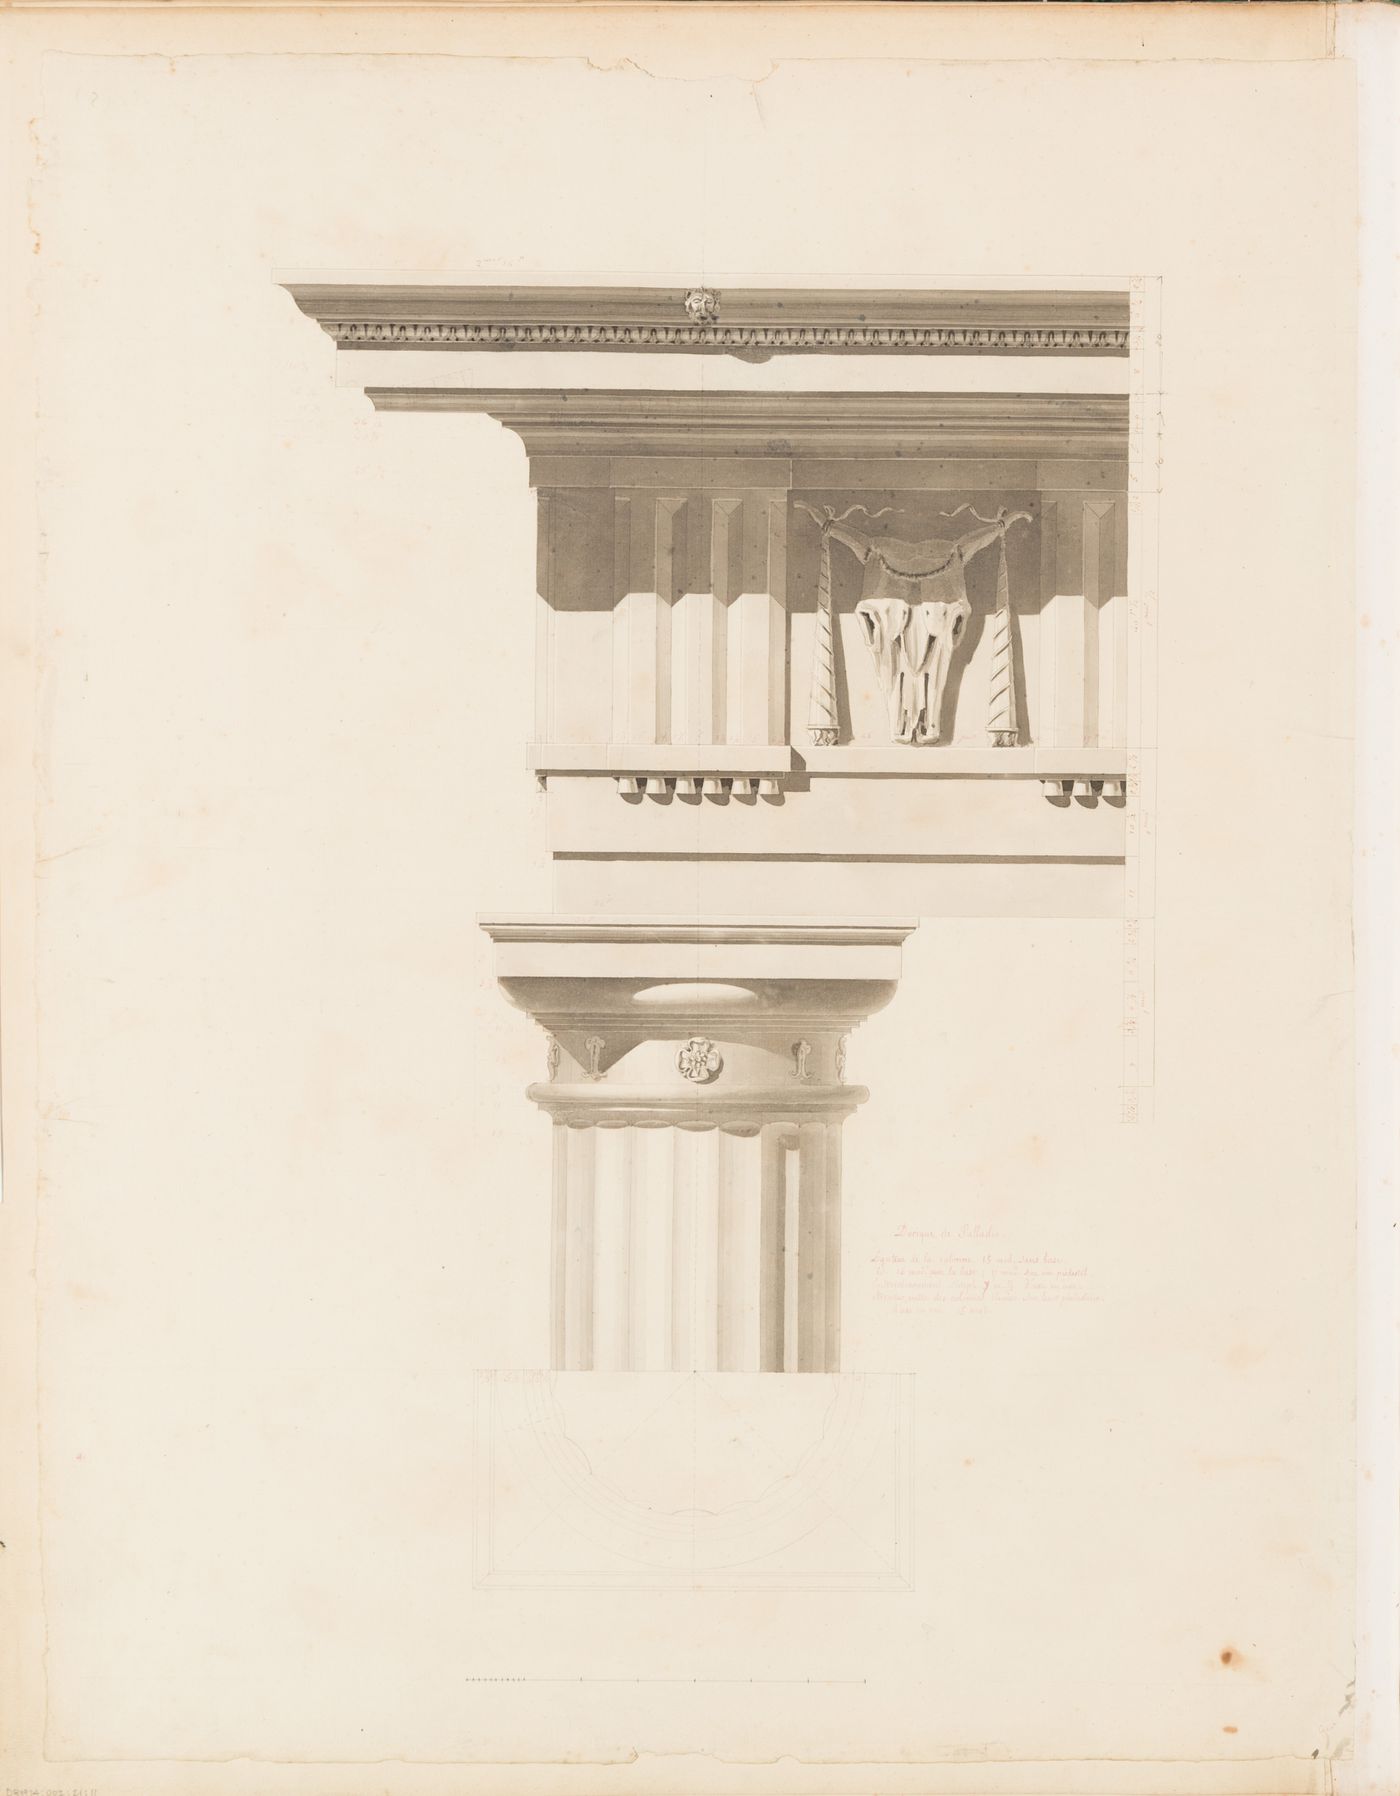 Elevation of a Doric shaft, capital, and entablature after Palladio, with a plan of the shaft and capital